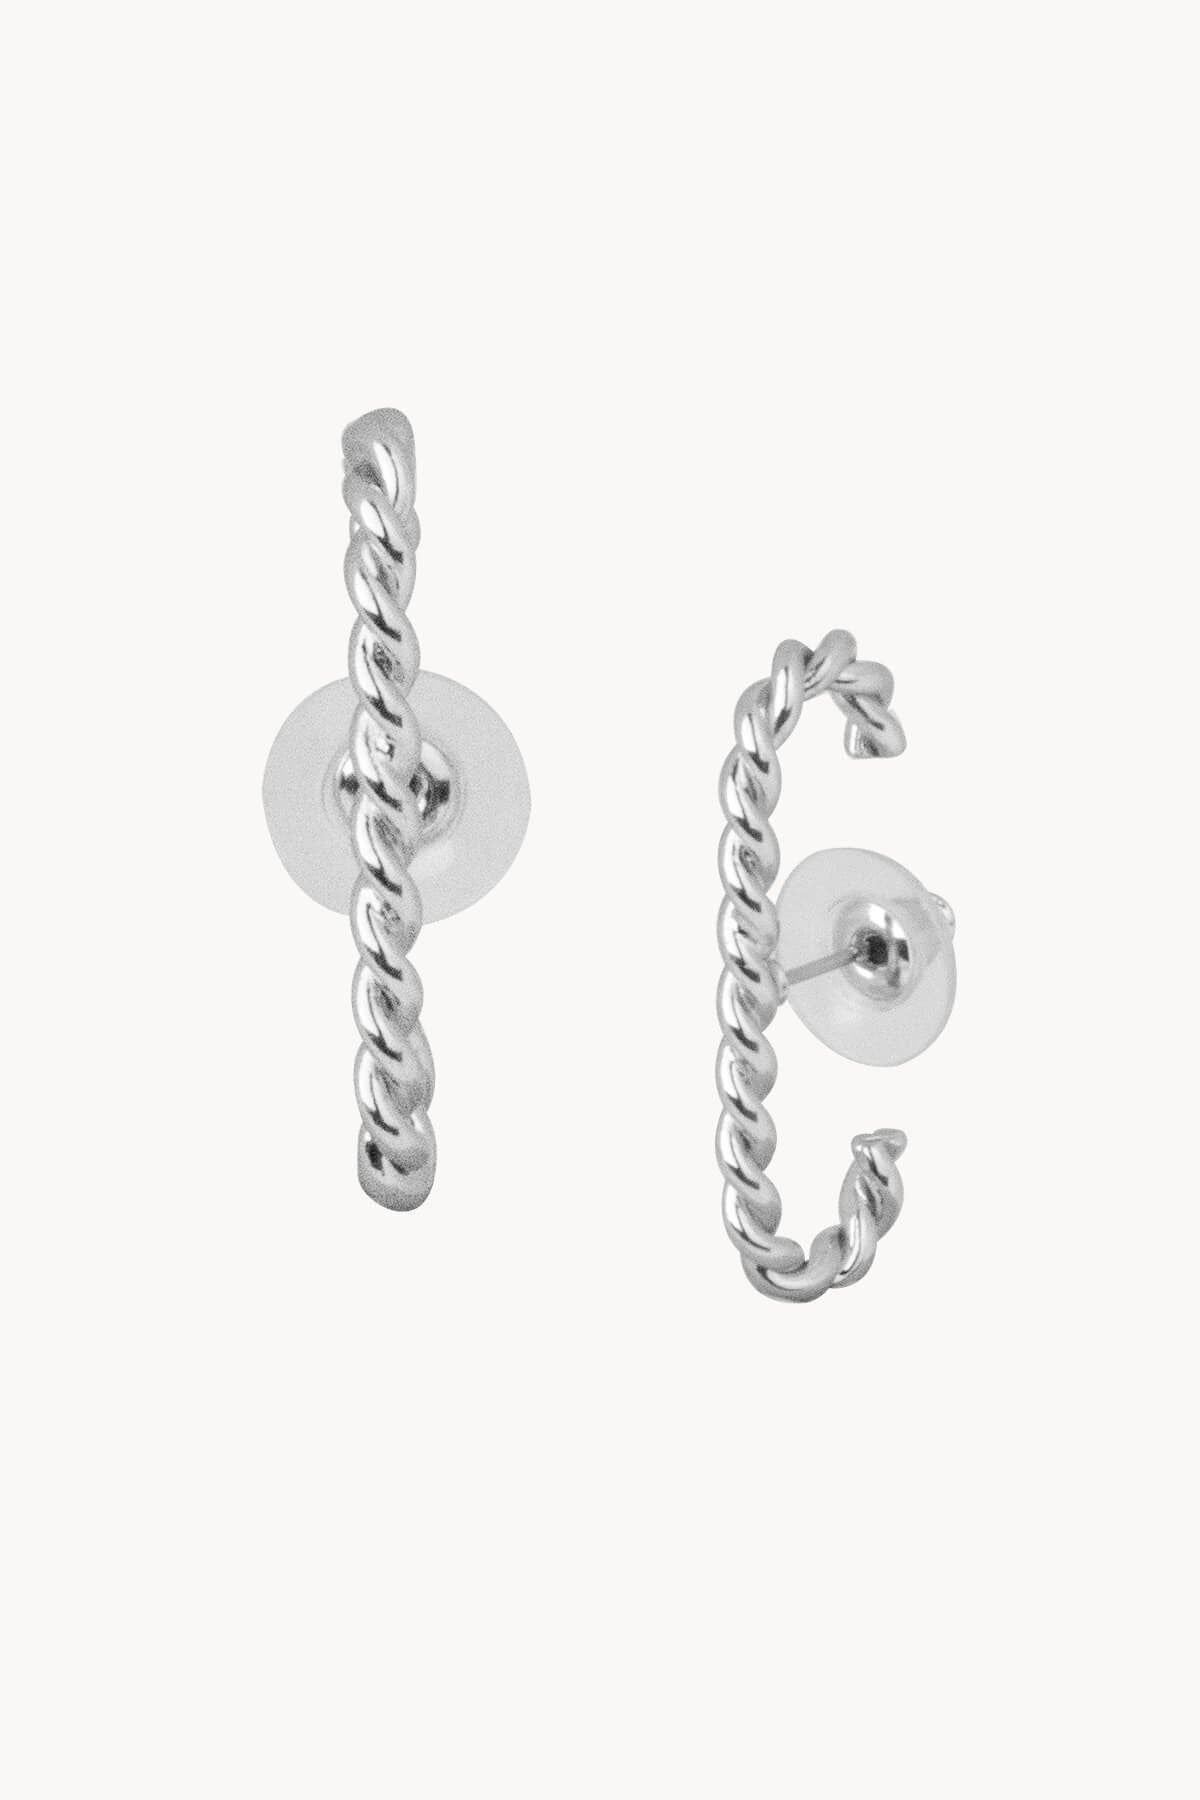 Knot Earrings Silver Plated